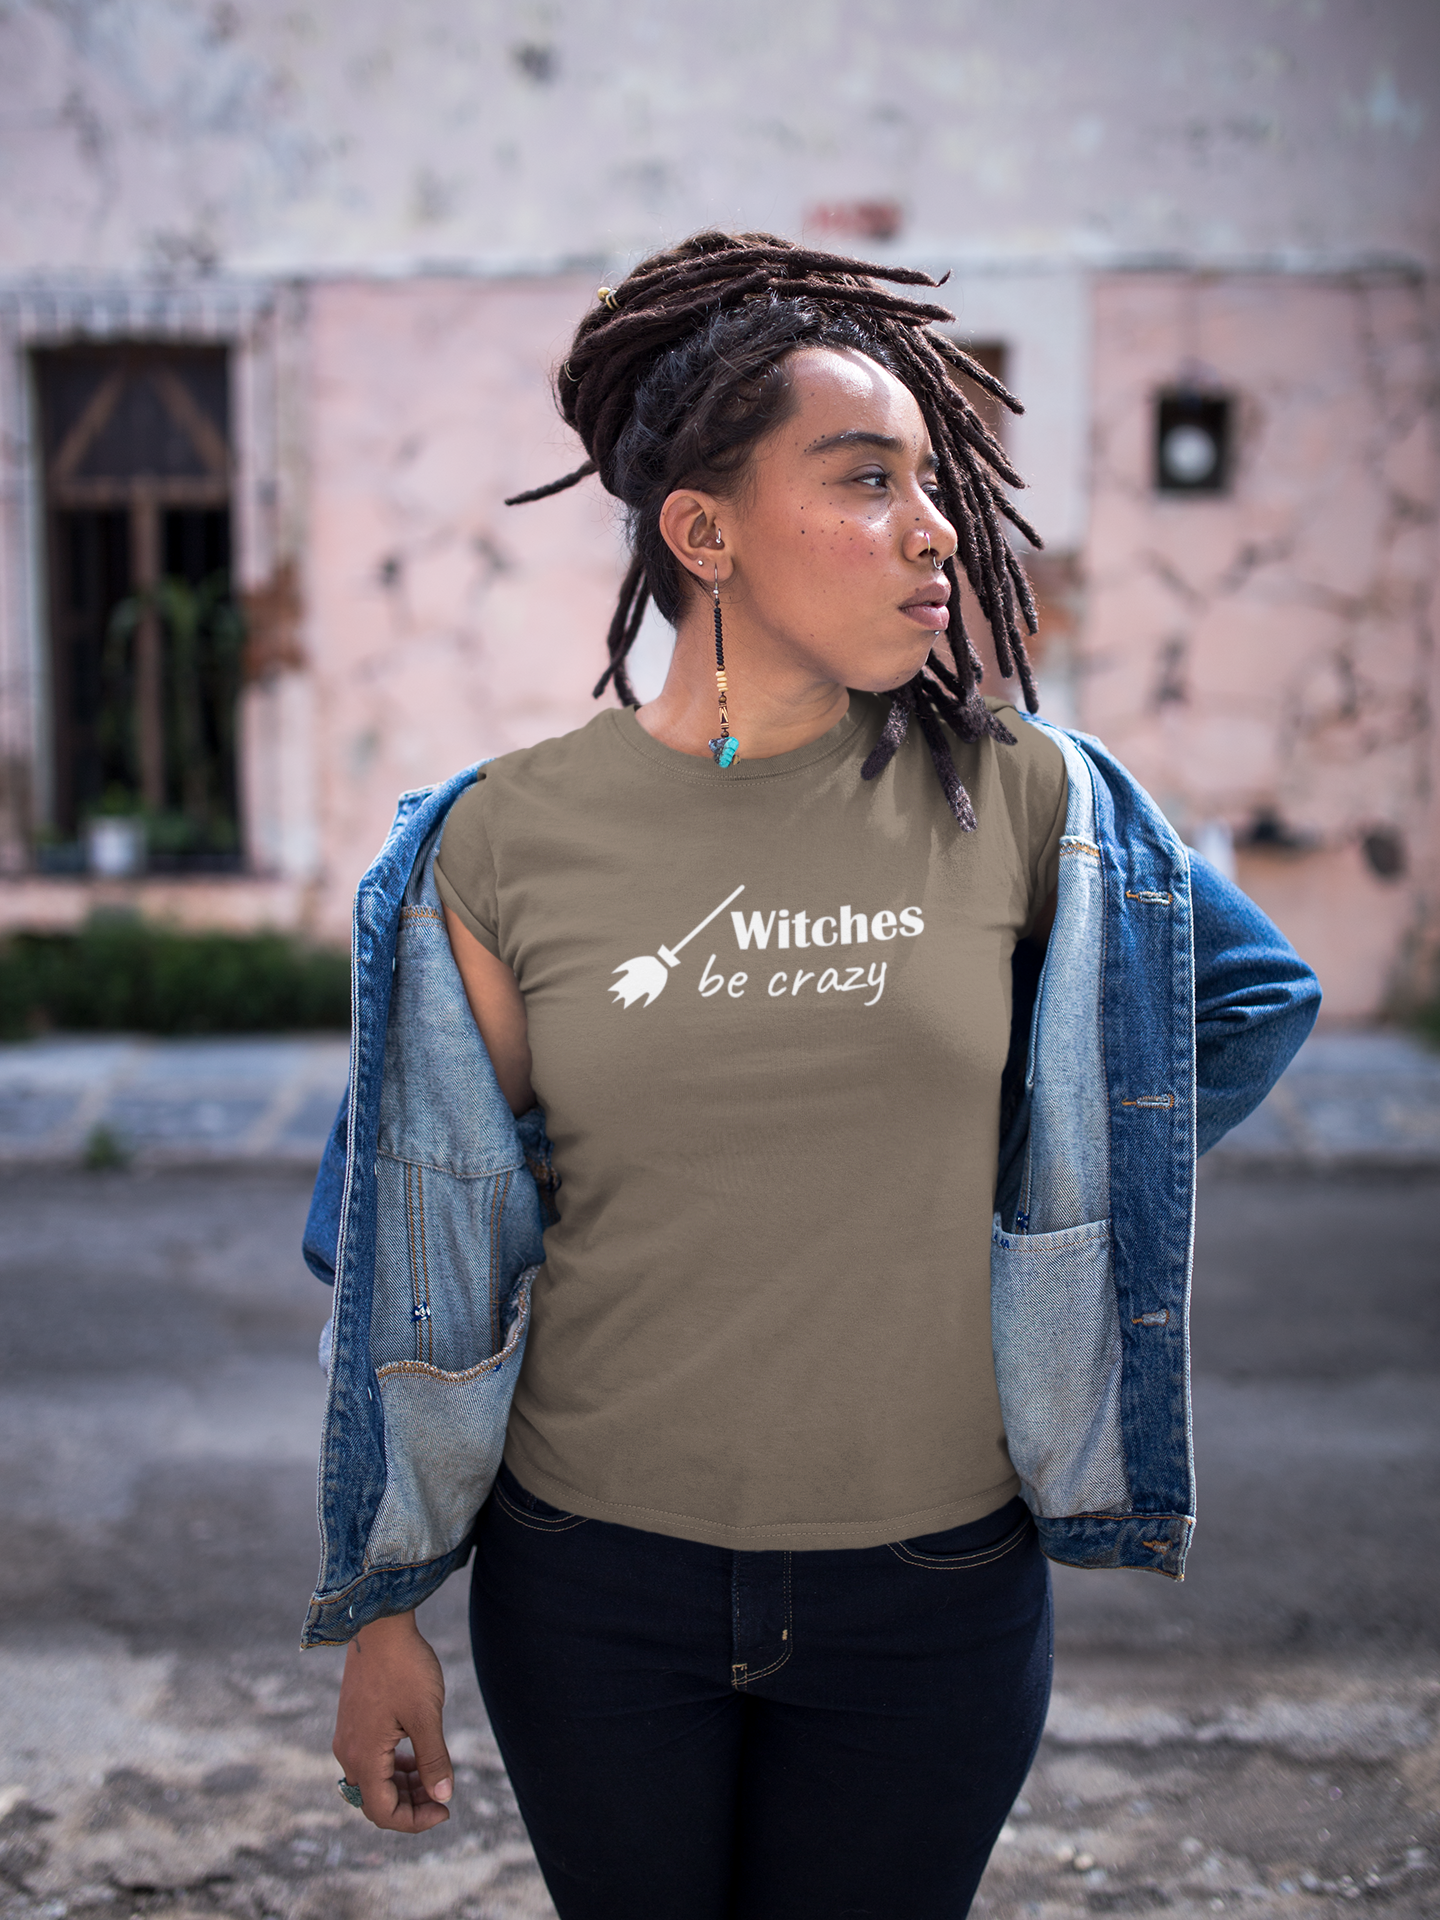 Witches be Crazy, witchy t-shirt